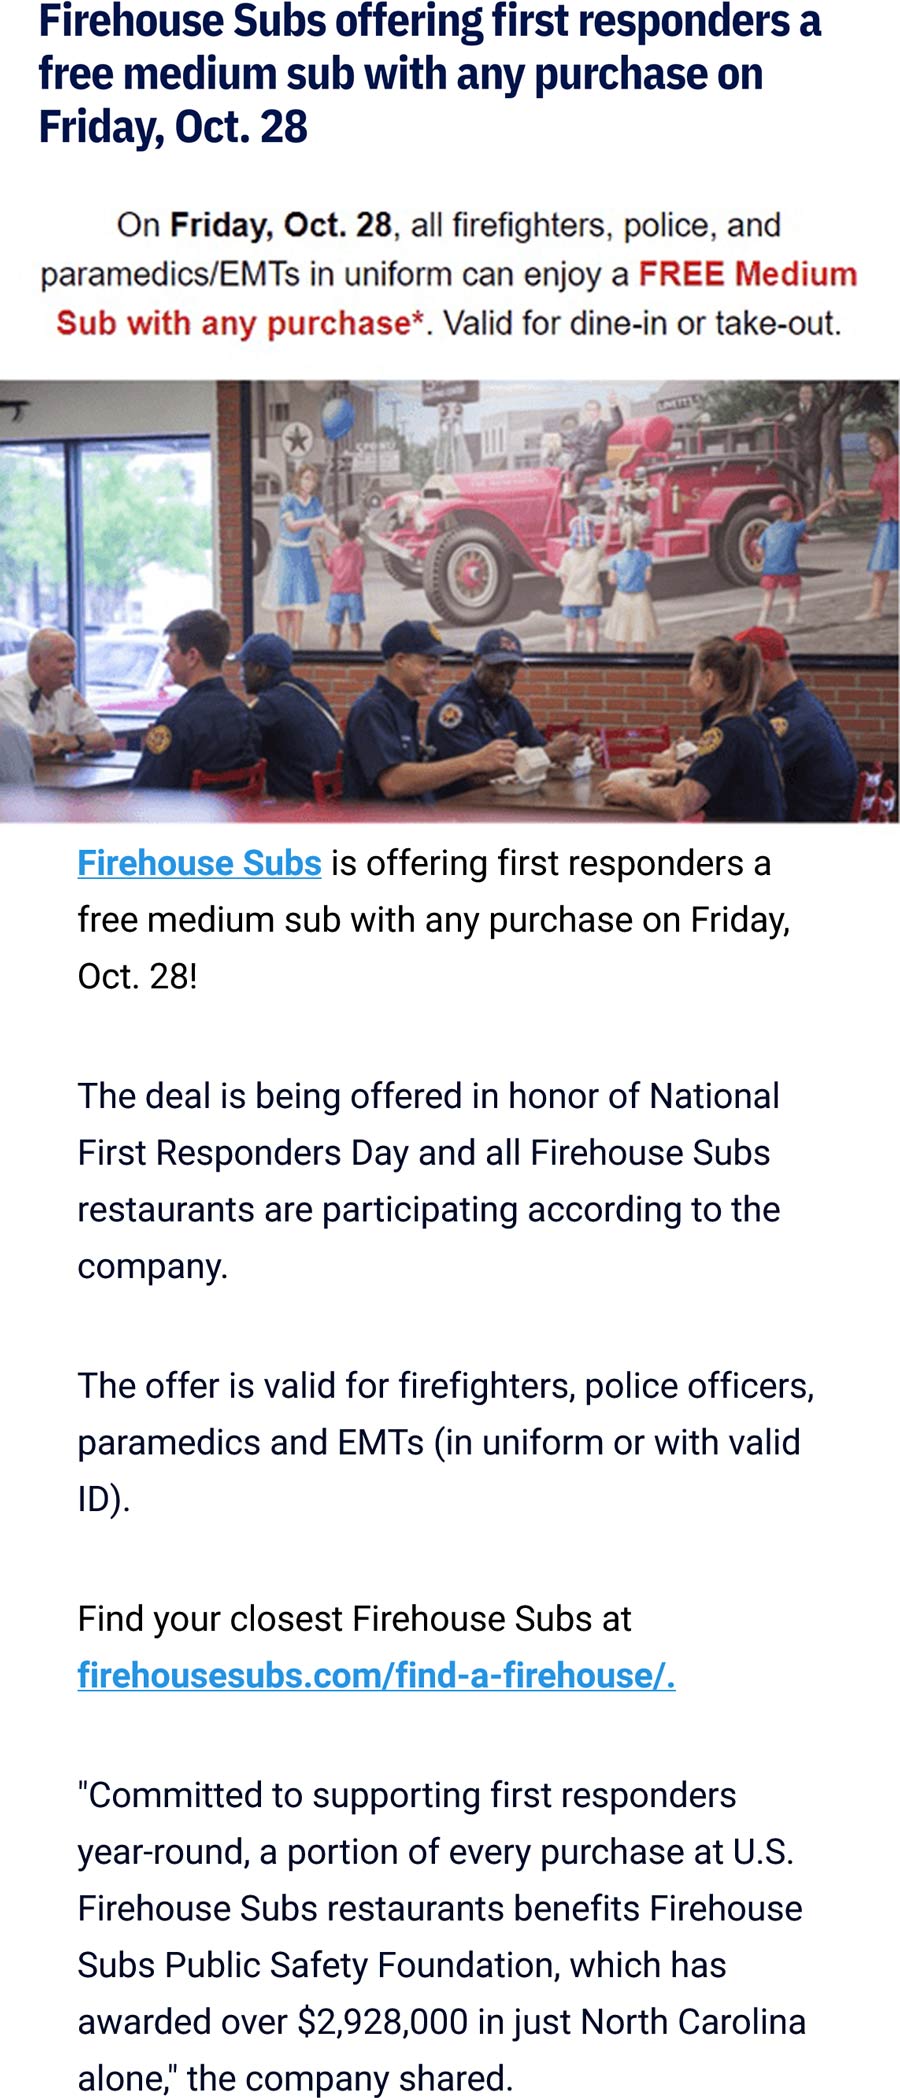 Firehouse Subs restaurants Coupon  First responders enjoy a free sub sandwich with any order today at Firehouse Subs #firehousesubs 